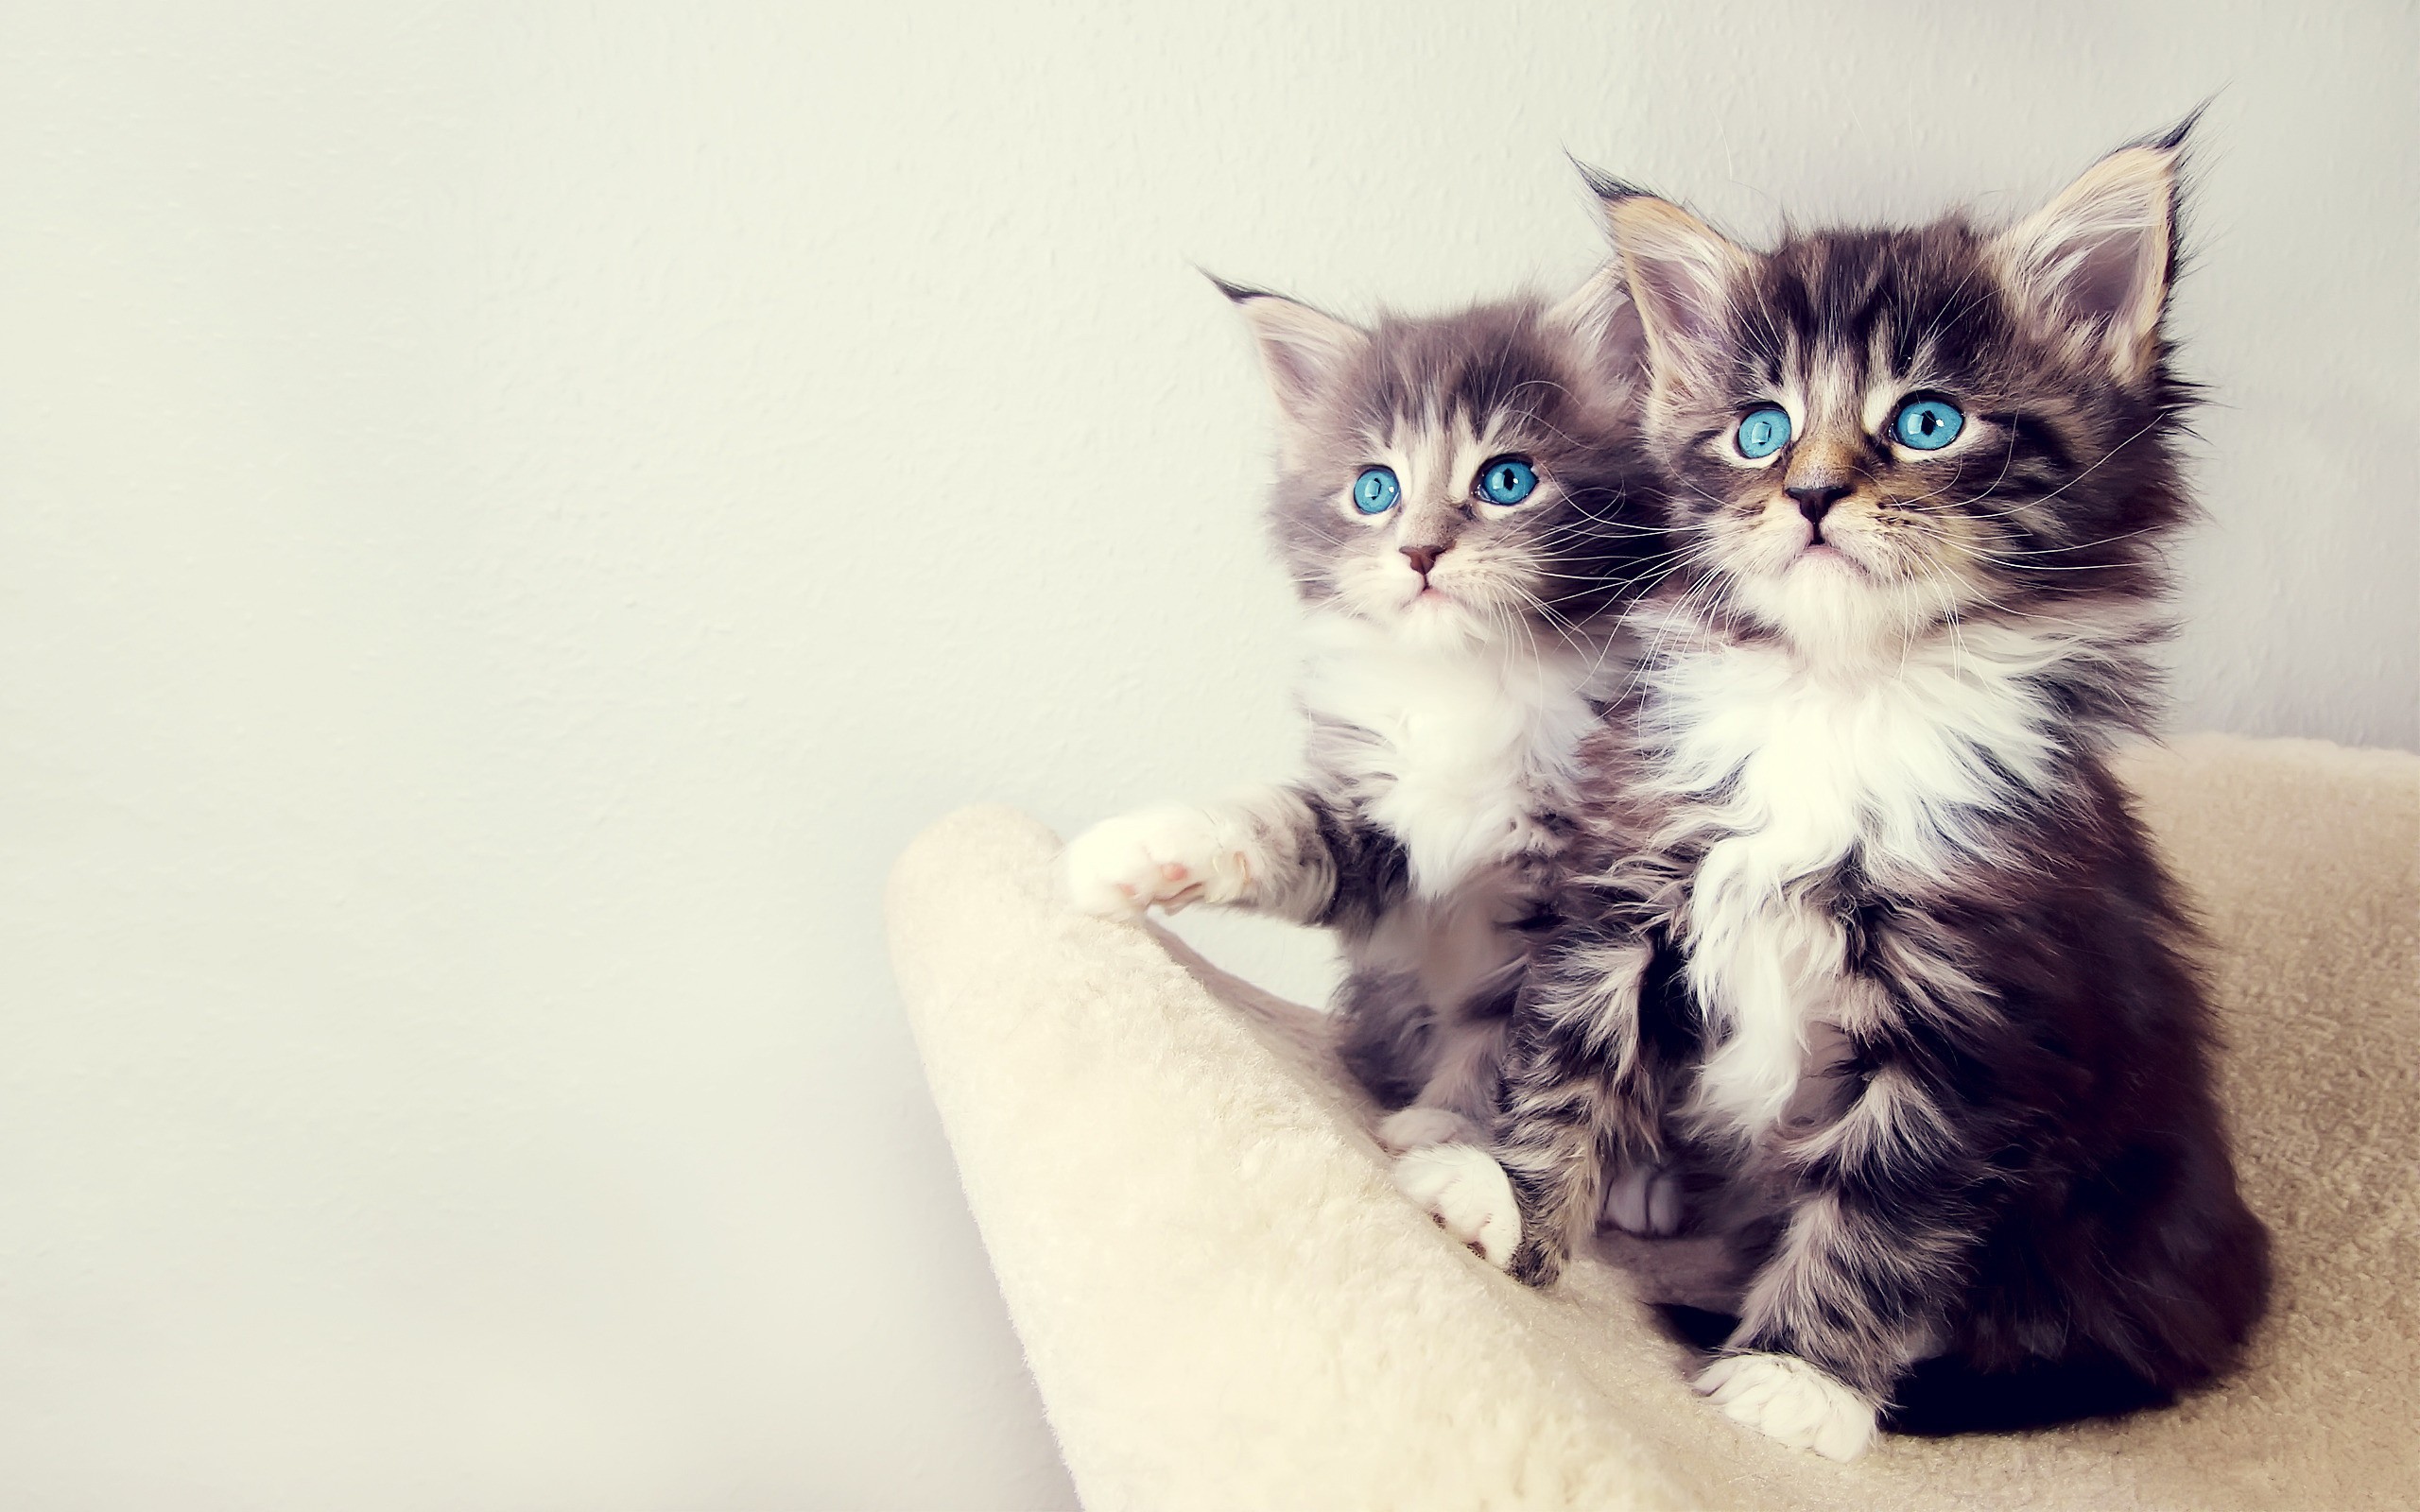 General 2560x1600 cats blue eyes kittens animals mammals simple background